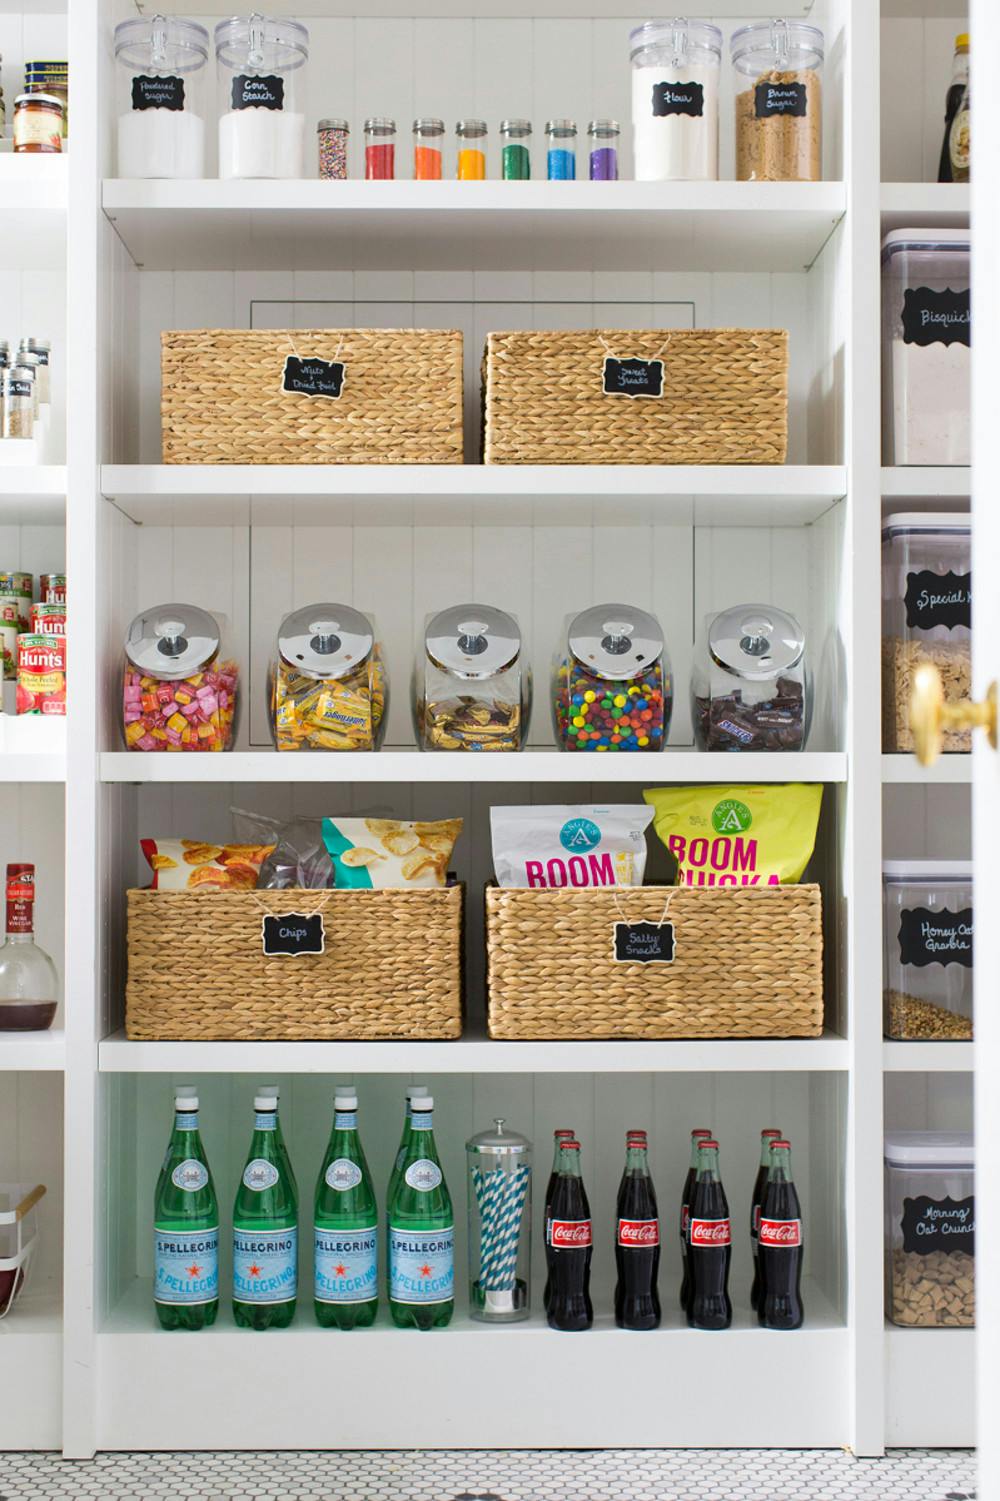 How to organise drink bottles - The Organised Housewife